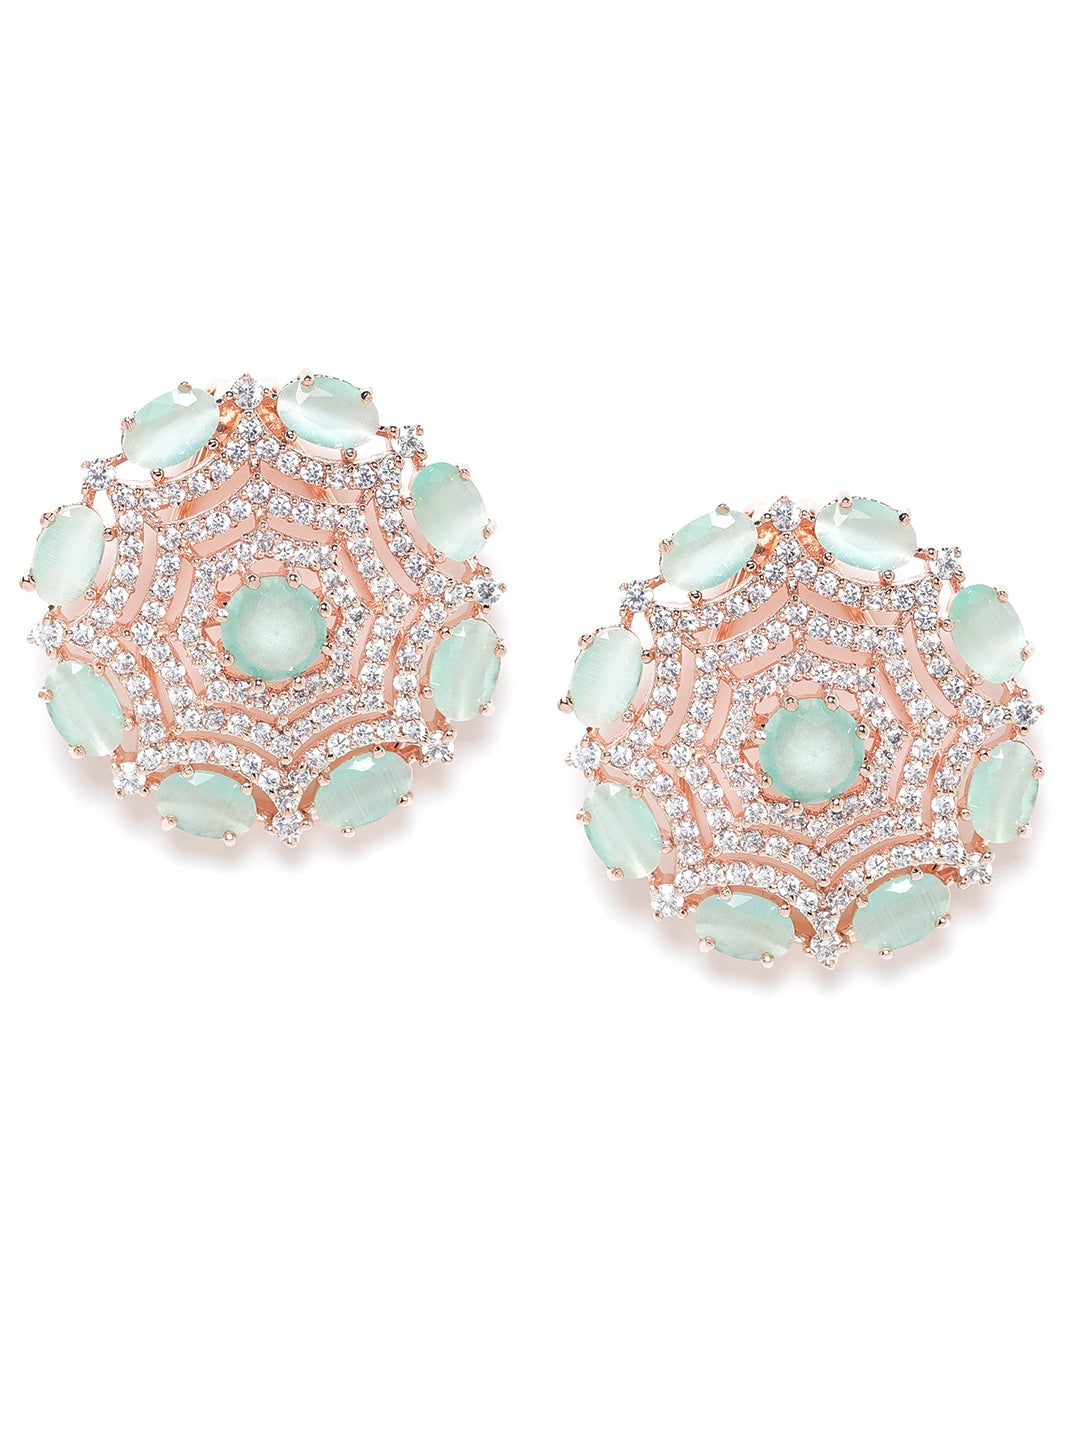 Sea Green Rose Gold-Plated Handcrafted Circular AD Studs